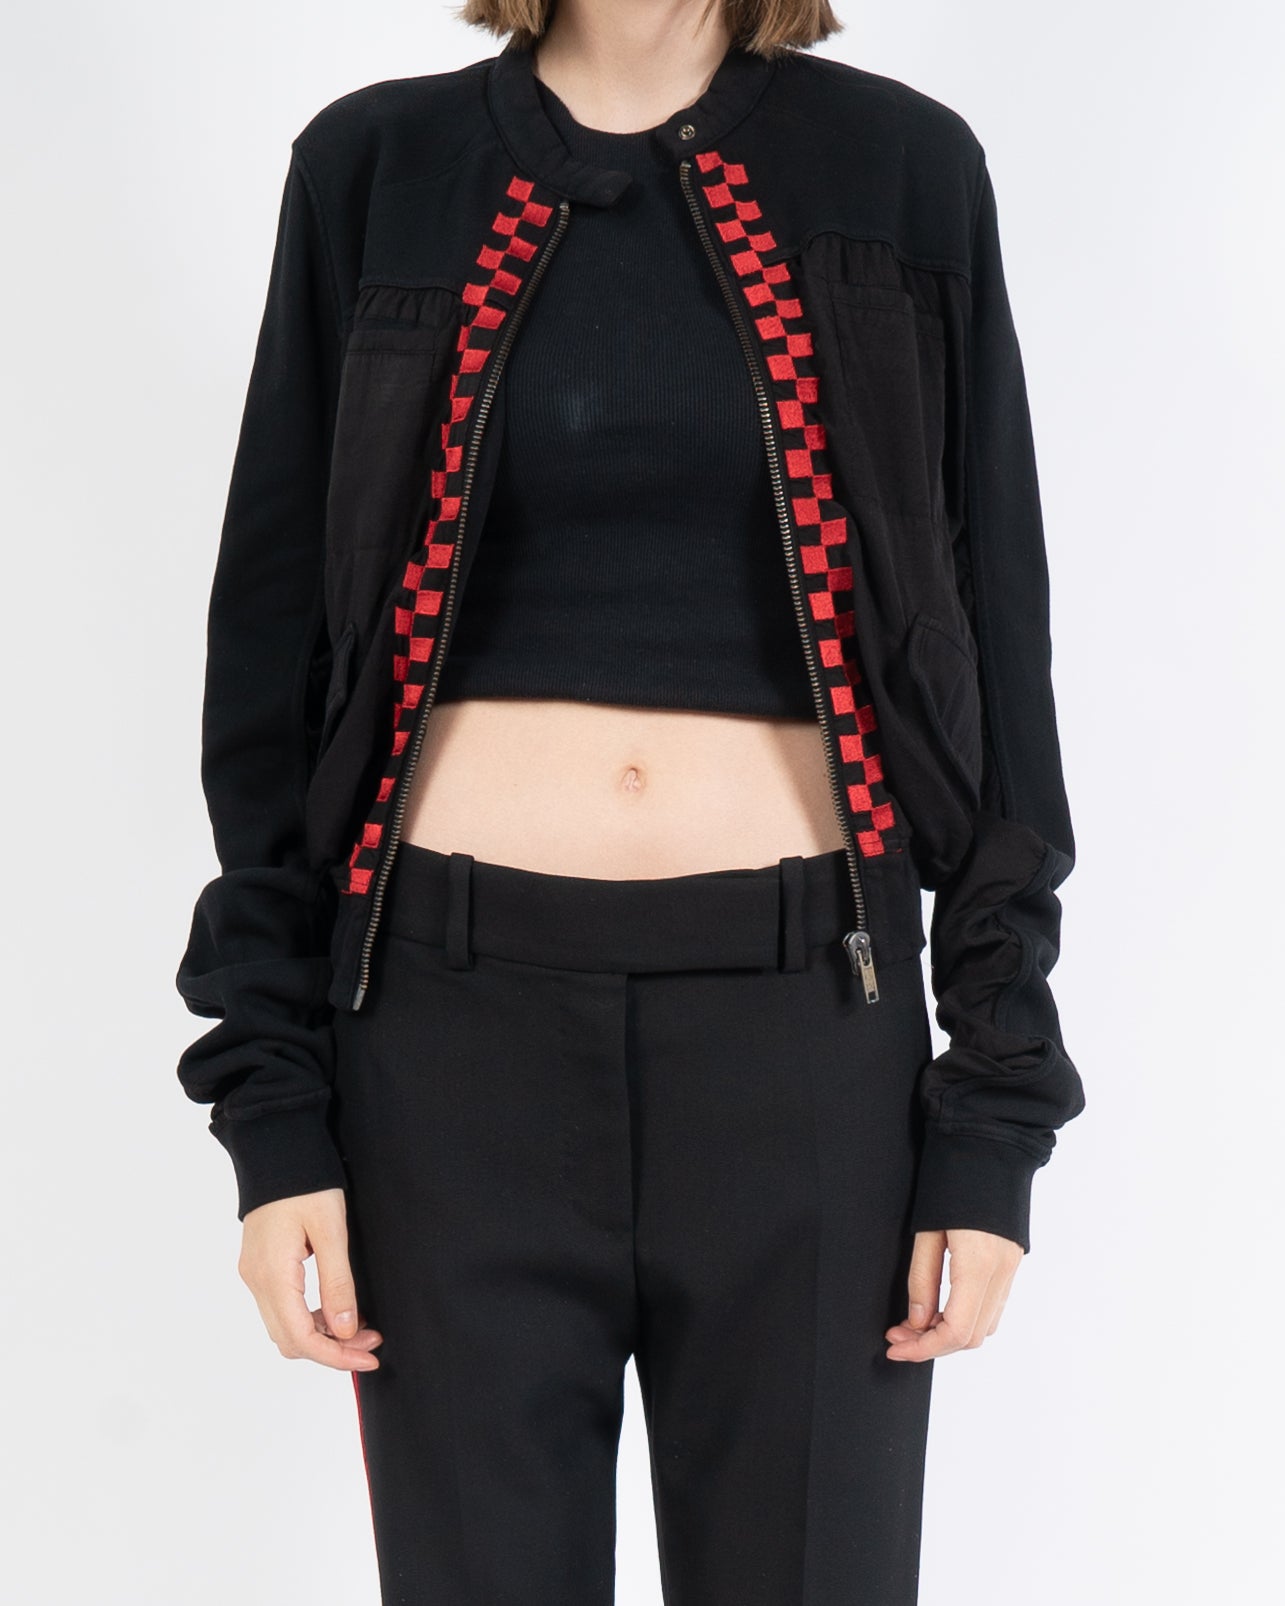 FW19 Red Embroidered Cropped Perth Bomber